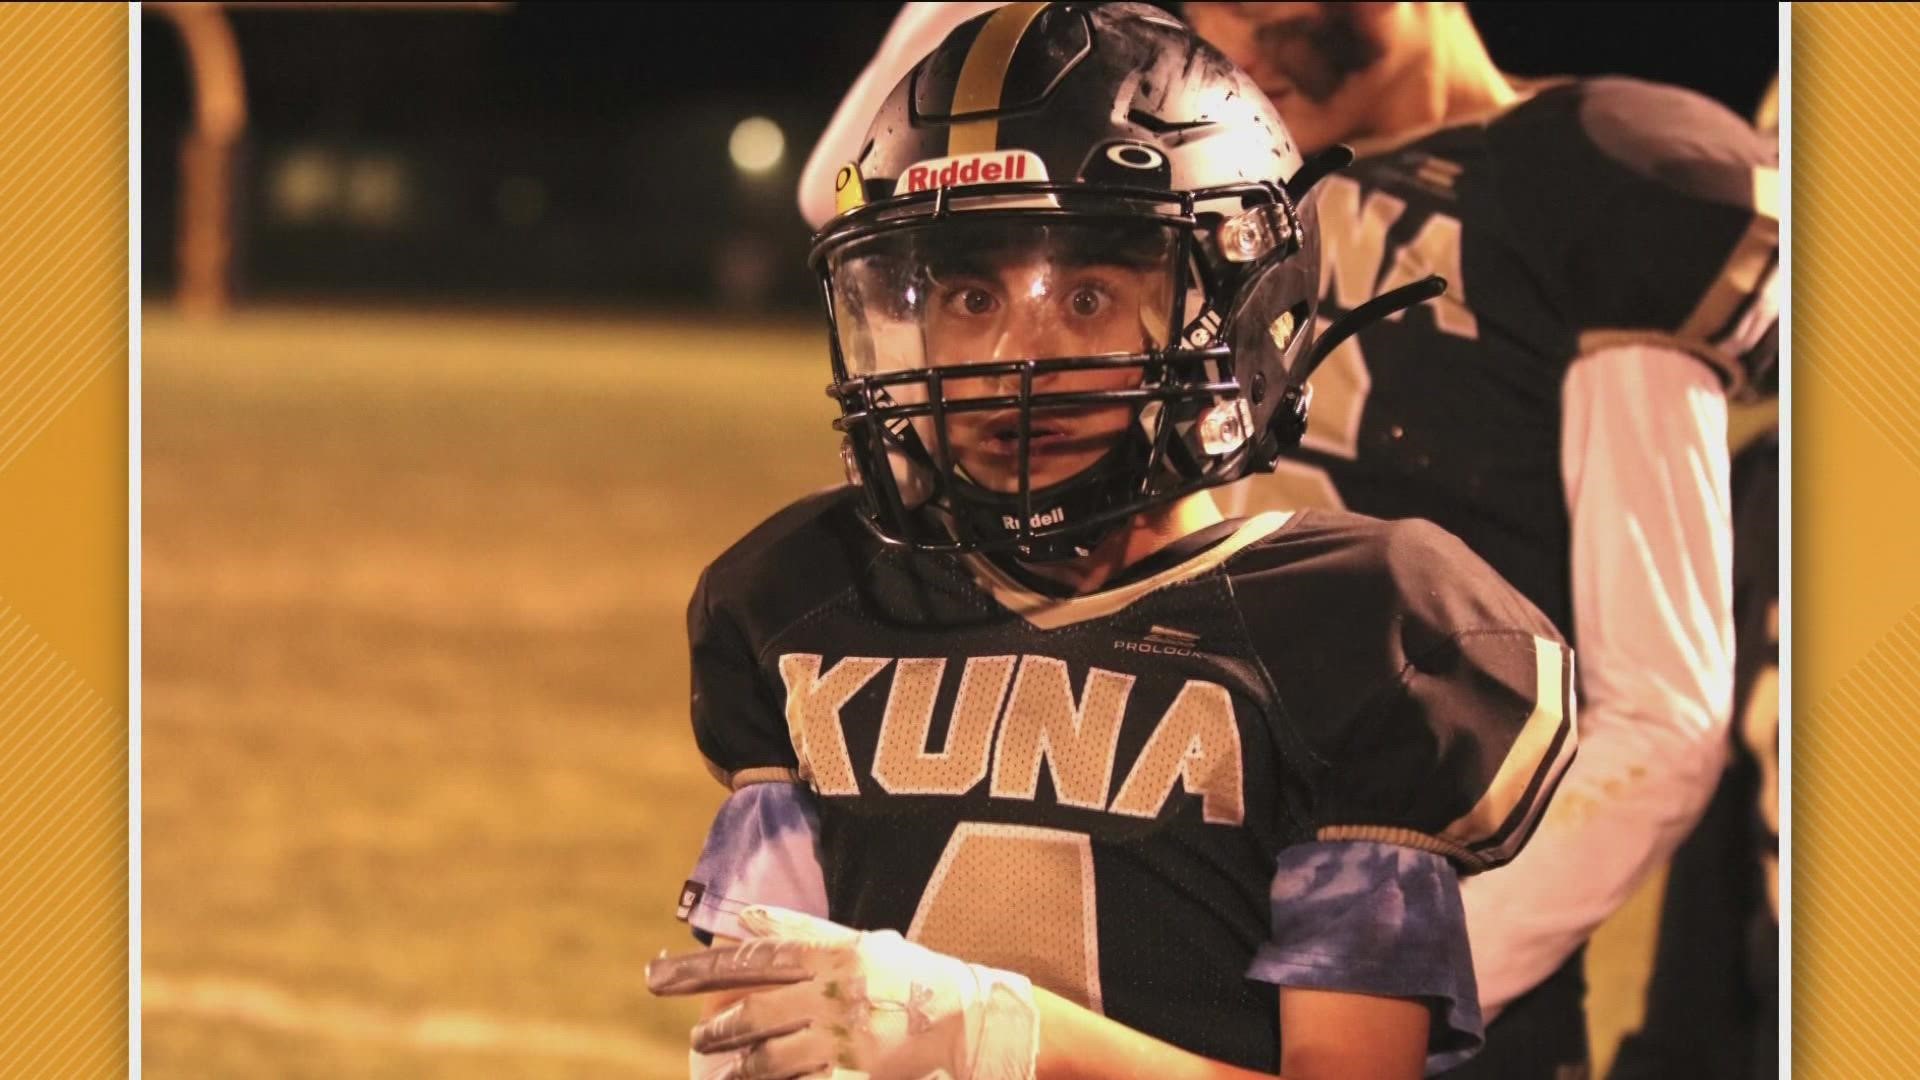 Sione Smith loves football, but medical conditions keep him off the field. The Kuna High team came up with something special.